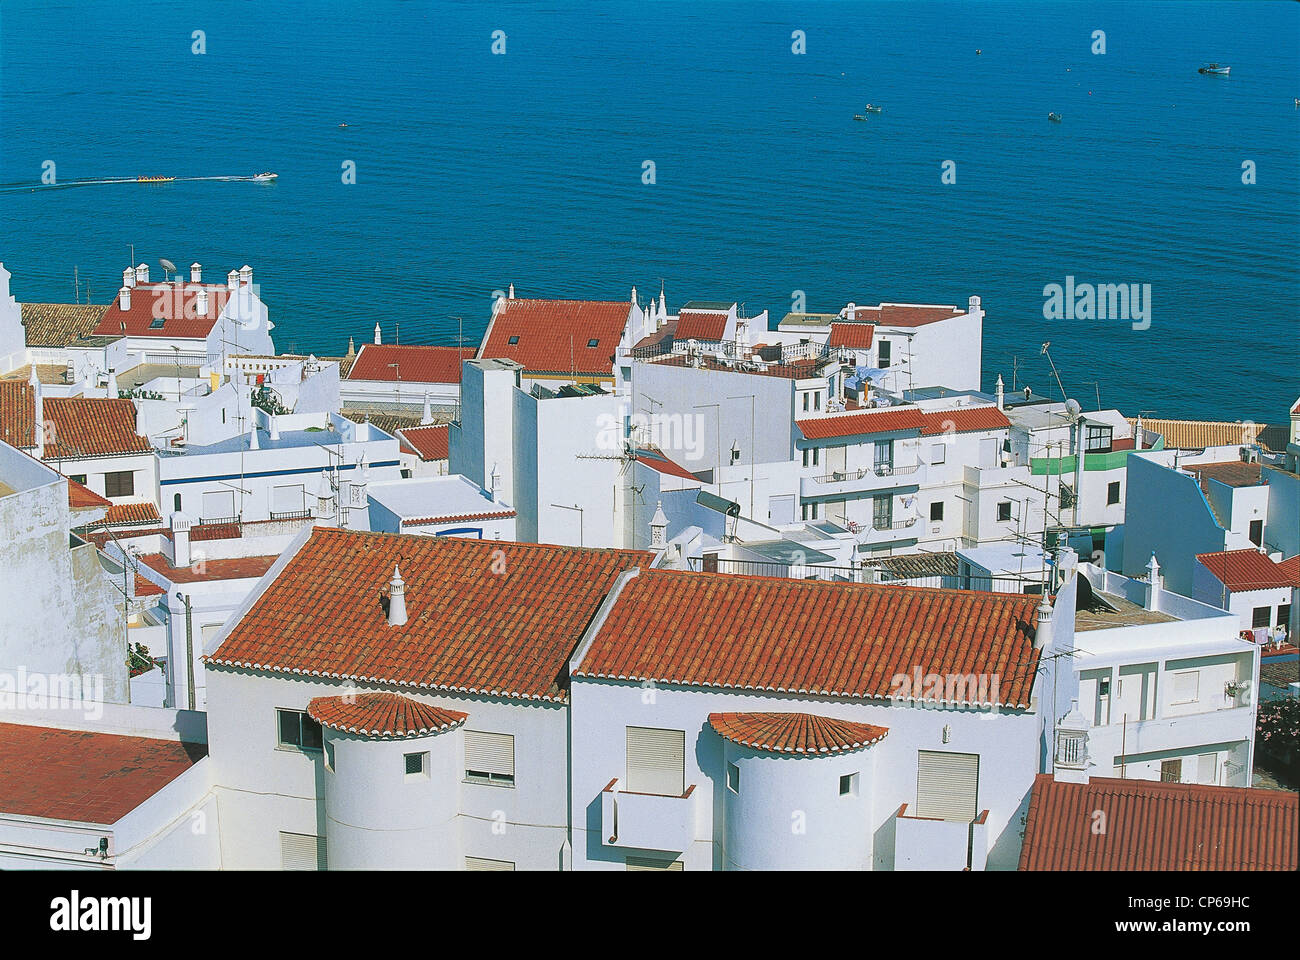 Portugal, Albufeira. THE ROOFS OF HOUSES Stock Photo